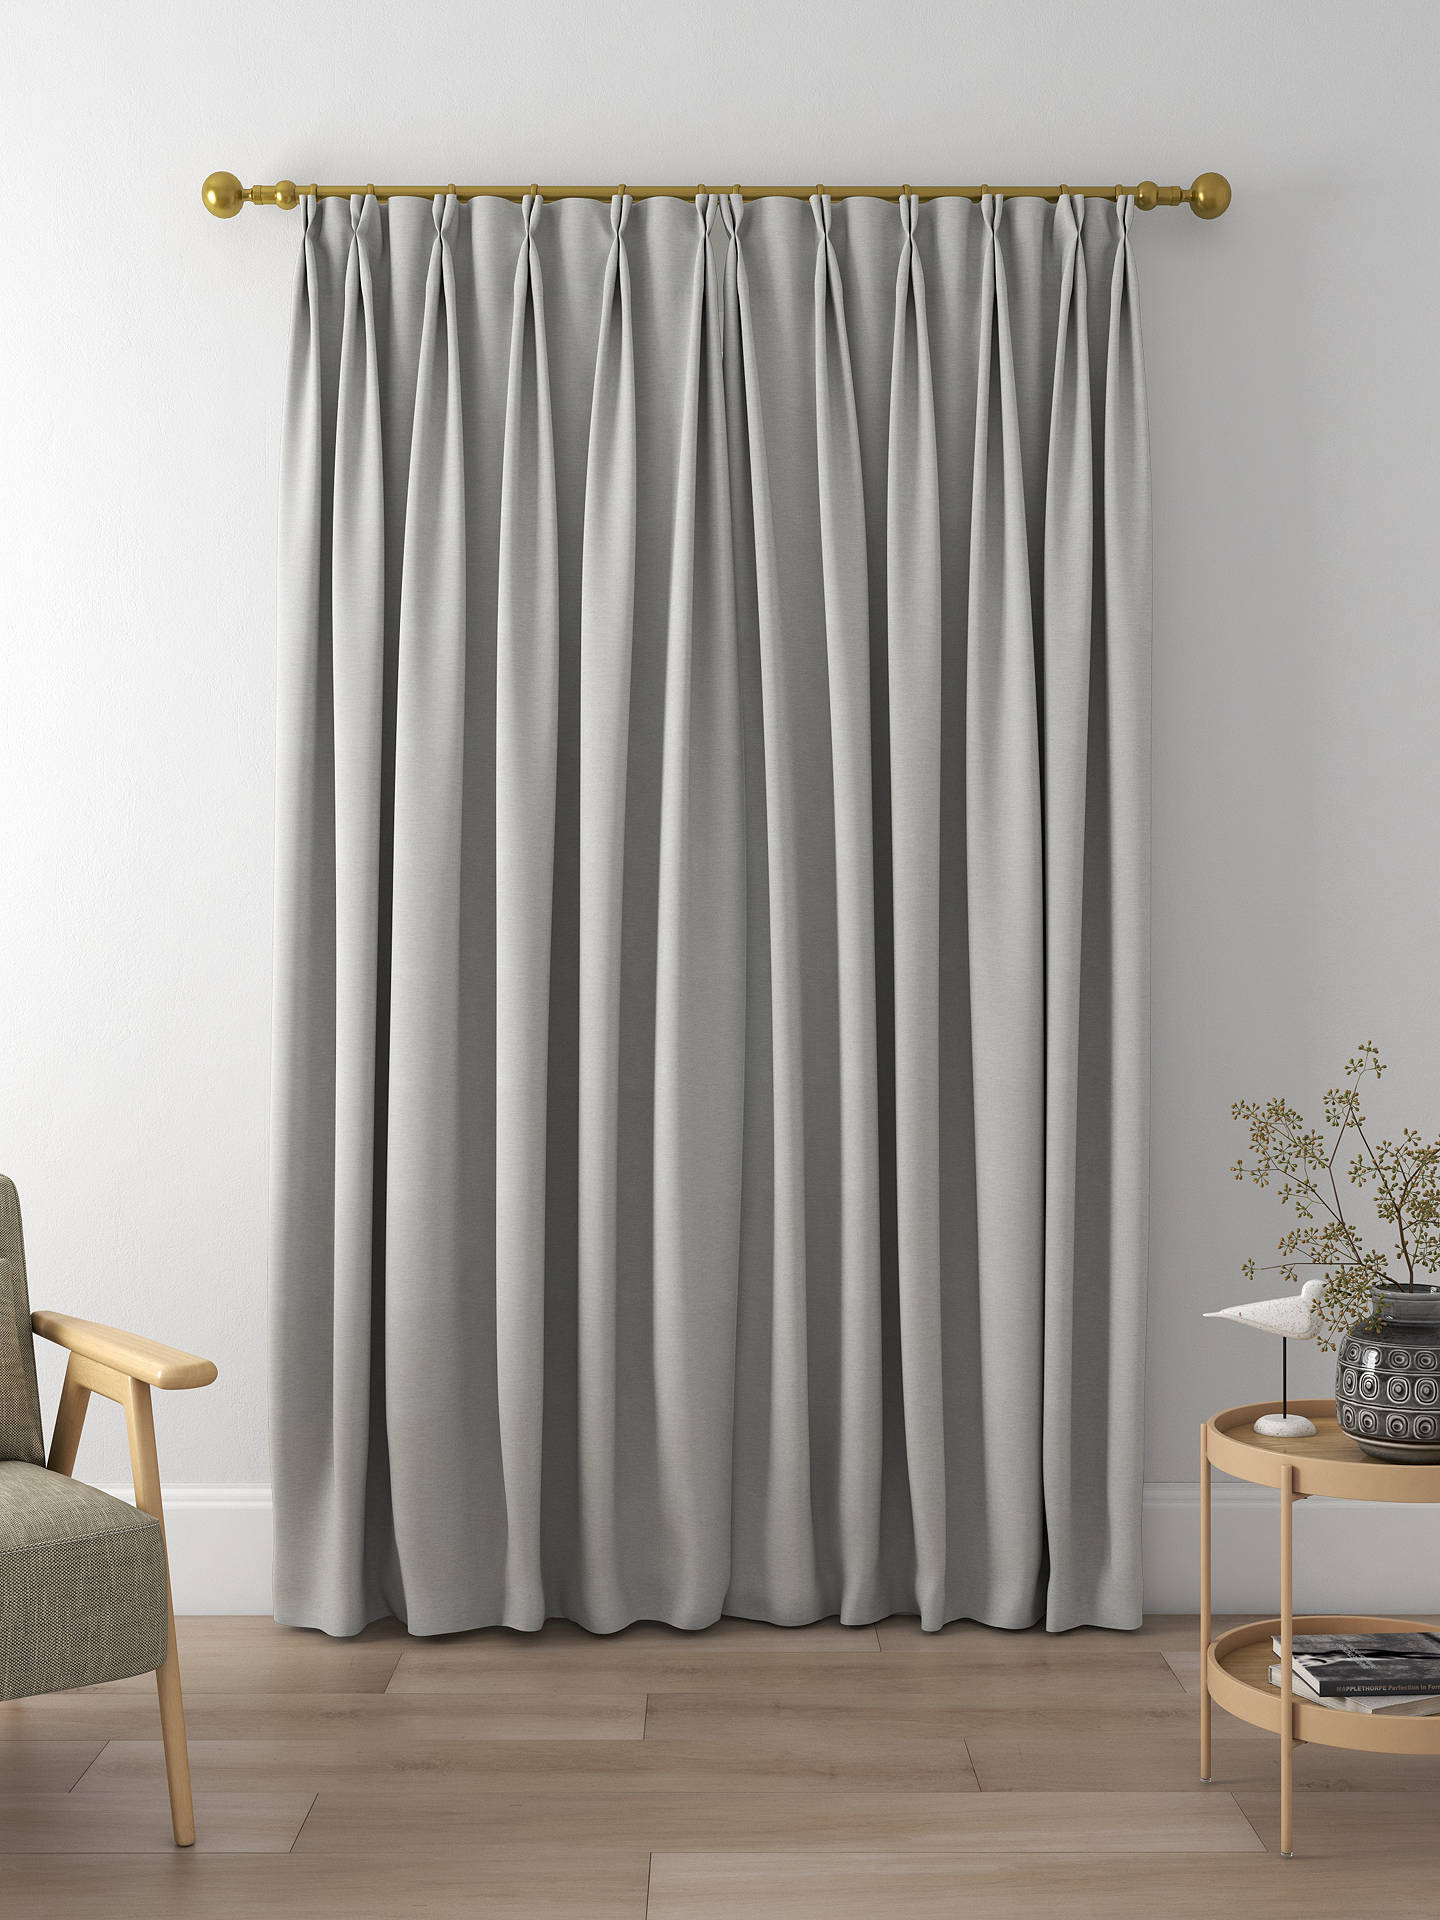 Laura Ashley Swanson Made to Measure Curtains, Steel